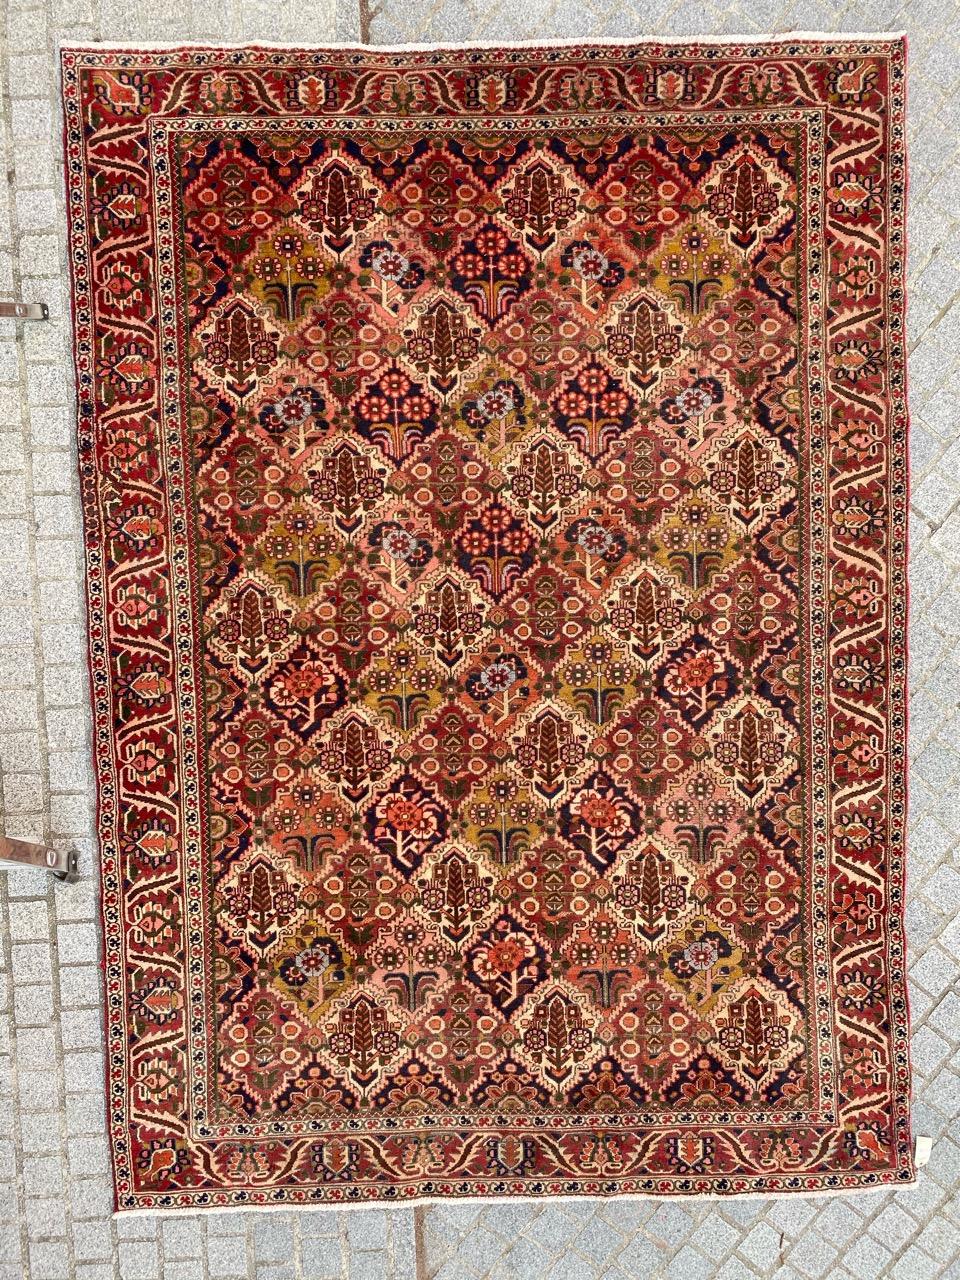 Discover the elegance of our exquisite midcentury rug featuring a captivating design and vibrant colors, including red, blue, yellow, green, pink, and orange. This hand-knotted masterpiece showcases meticulous craftsmanship with wool velvet on a